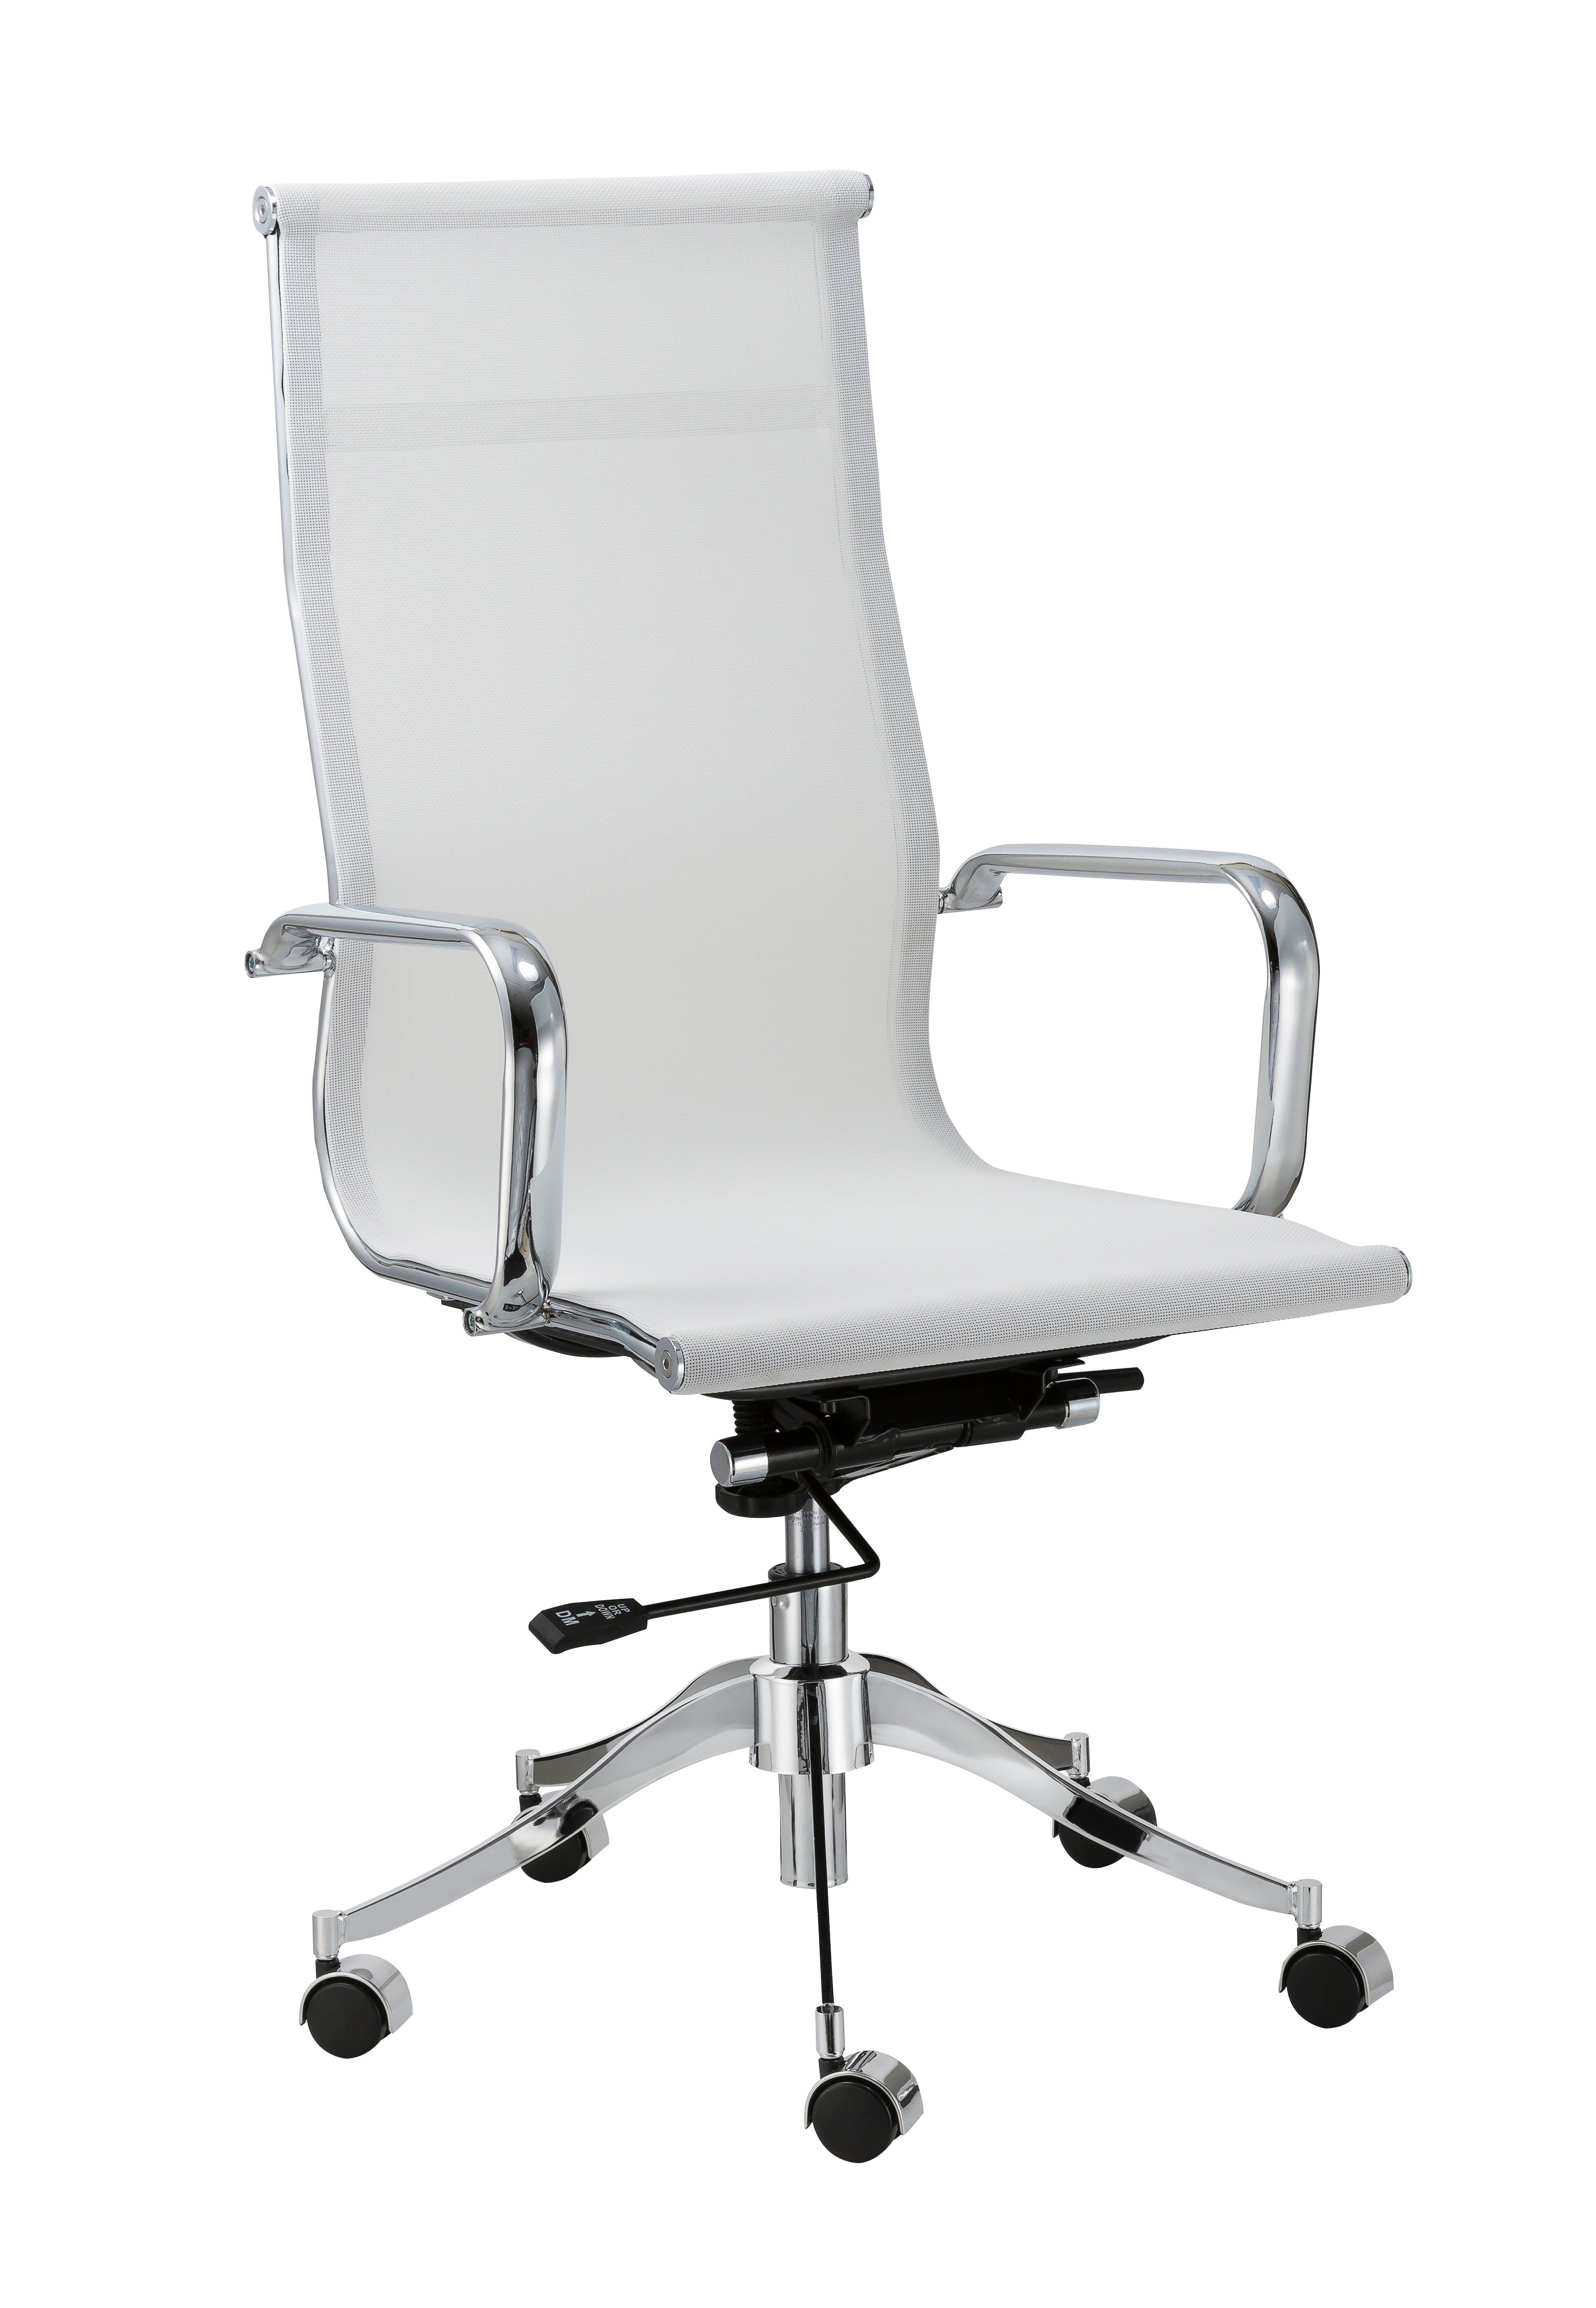 Chintaly 5207-cch-wht Adjustable Height Pneumatic Office Chair